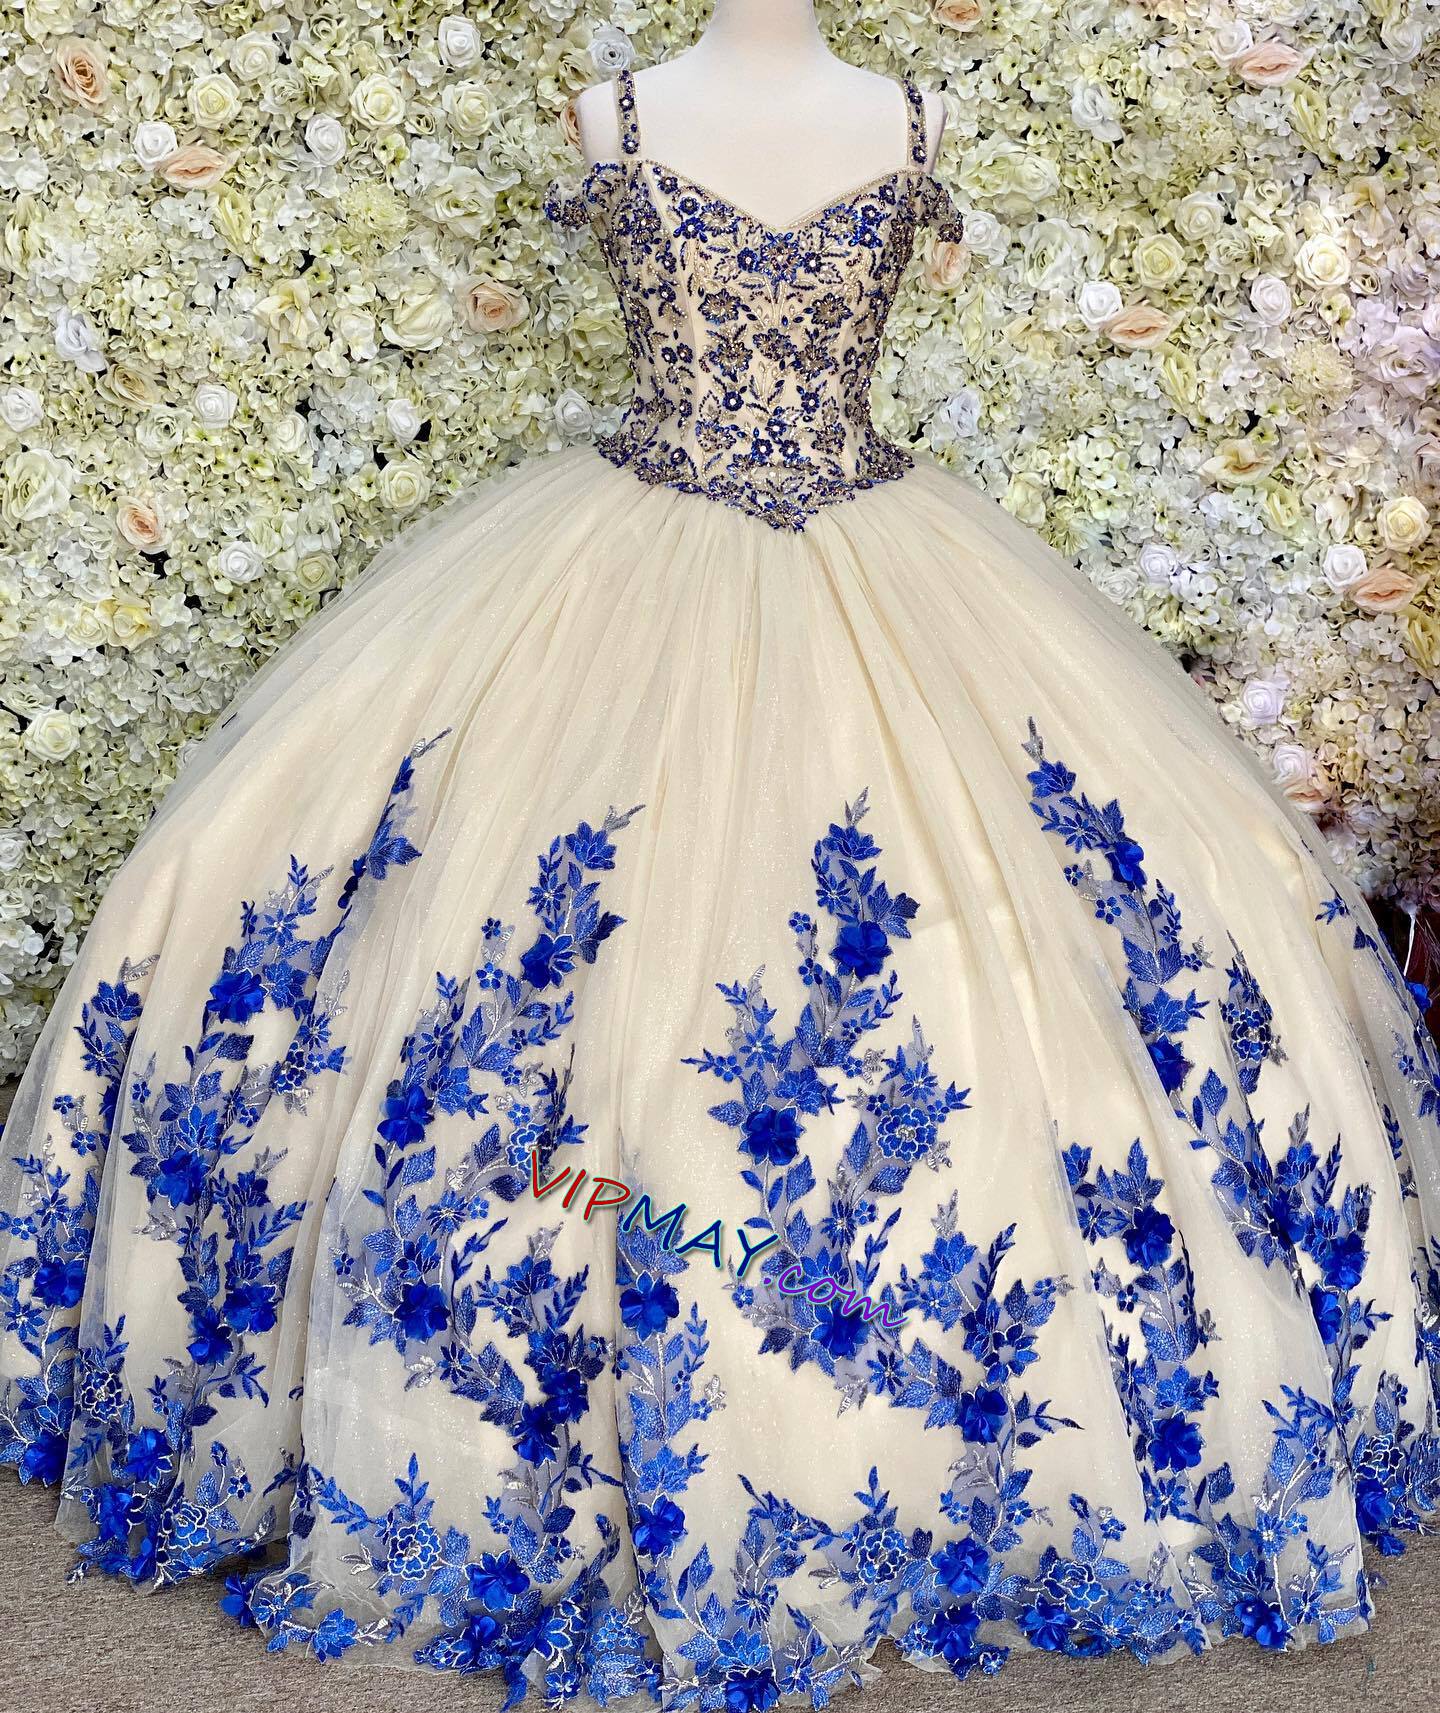 champagne colored quinceanera dress,in royal blue quinceanera dress,tulle skirt quinceanera dress,3d floral applique quinceanera dress,beaded bodice quinceanera dress,off shoulder quinceanera dress,2021 quinceanera dress,stores that sell quinceanera dress,cheap quinceanera dress stores,